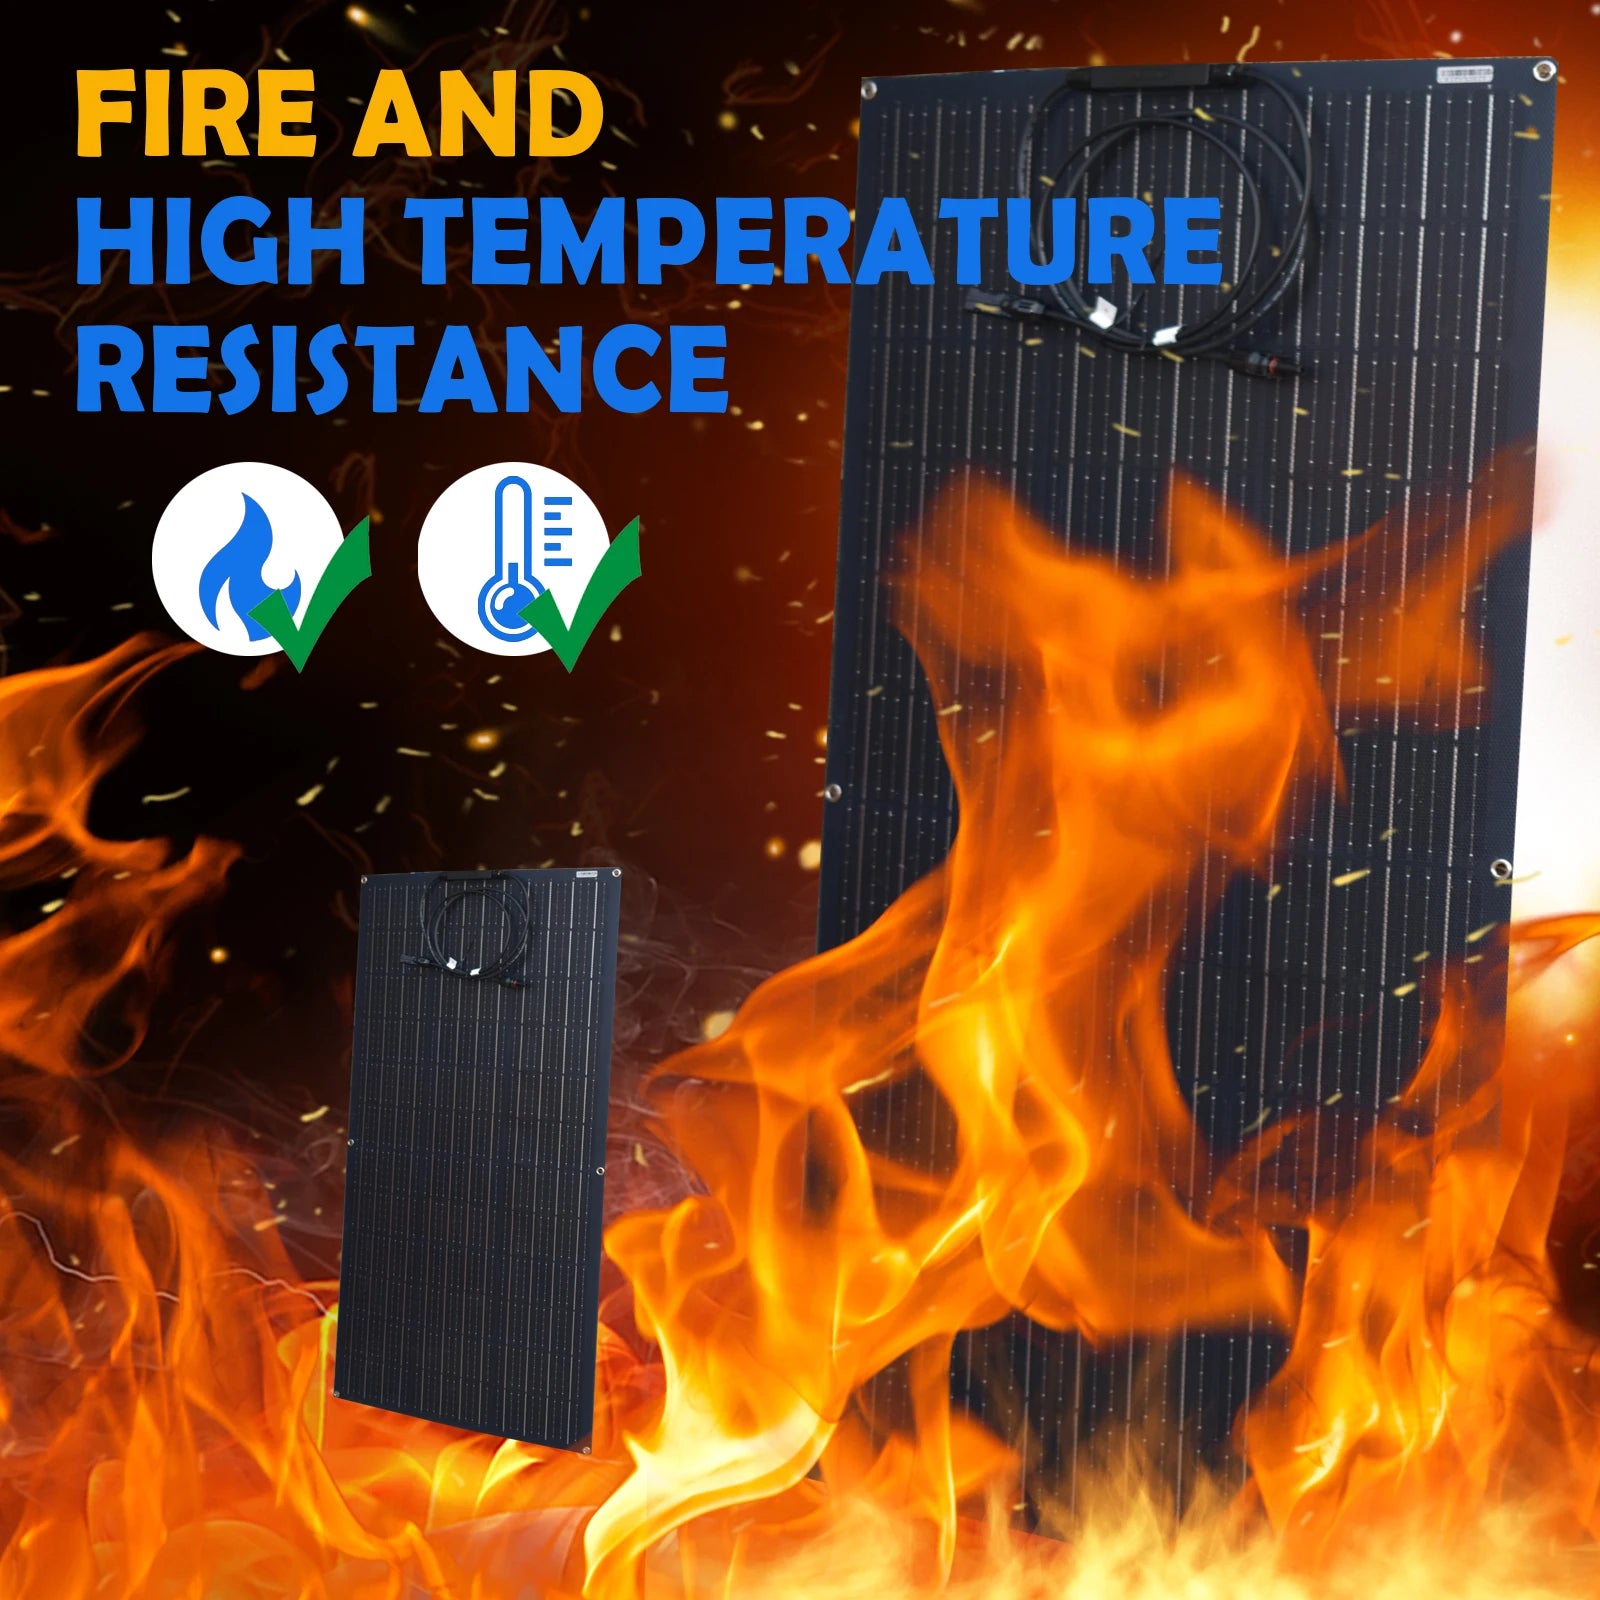 Fire-resistant and high-temperature tolerant for added safety.